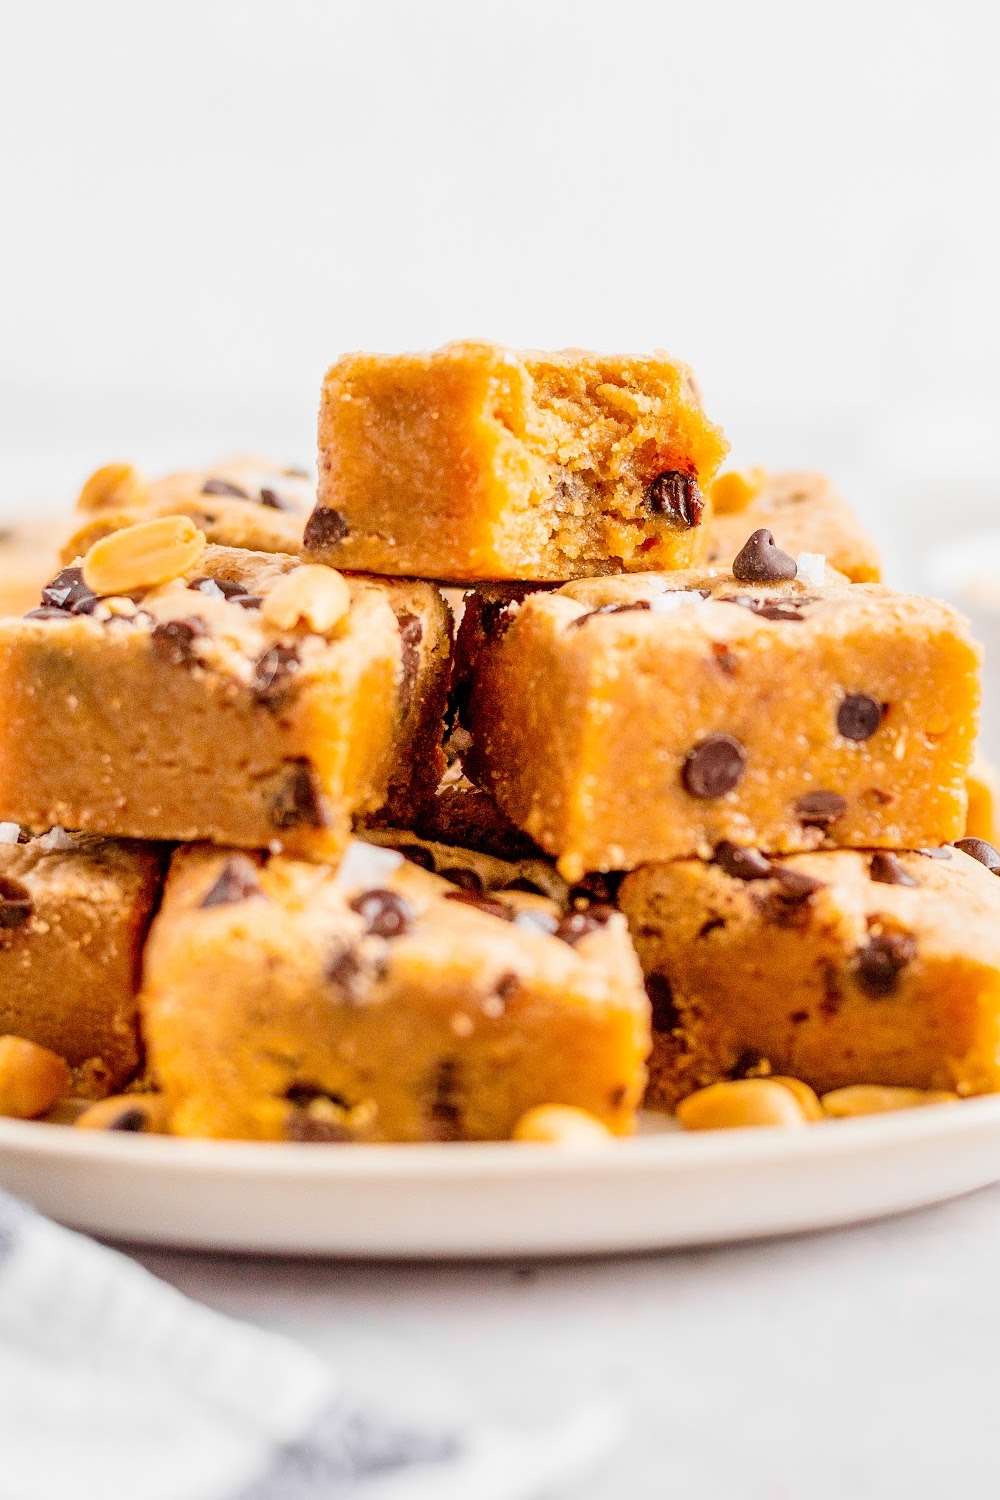 A stack of peanut butter chocolate chip blondies on a white plate the top blondie has a bite missing.